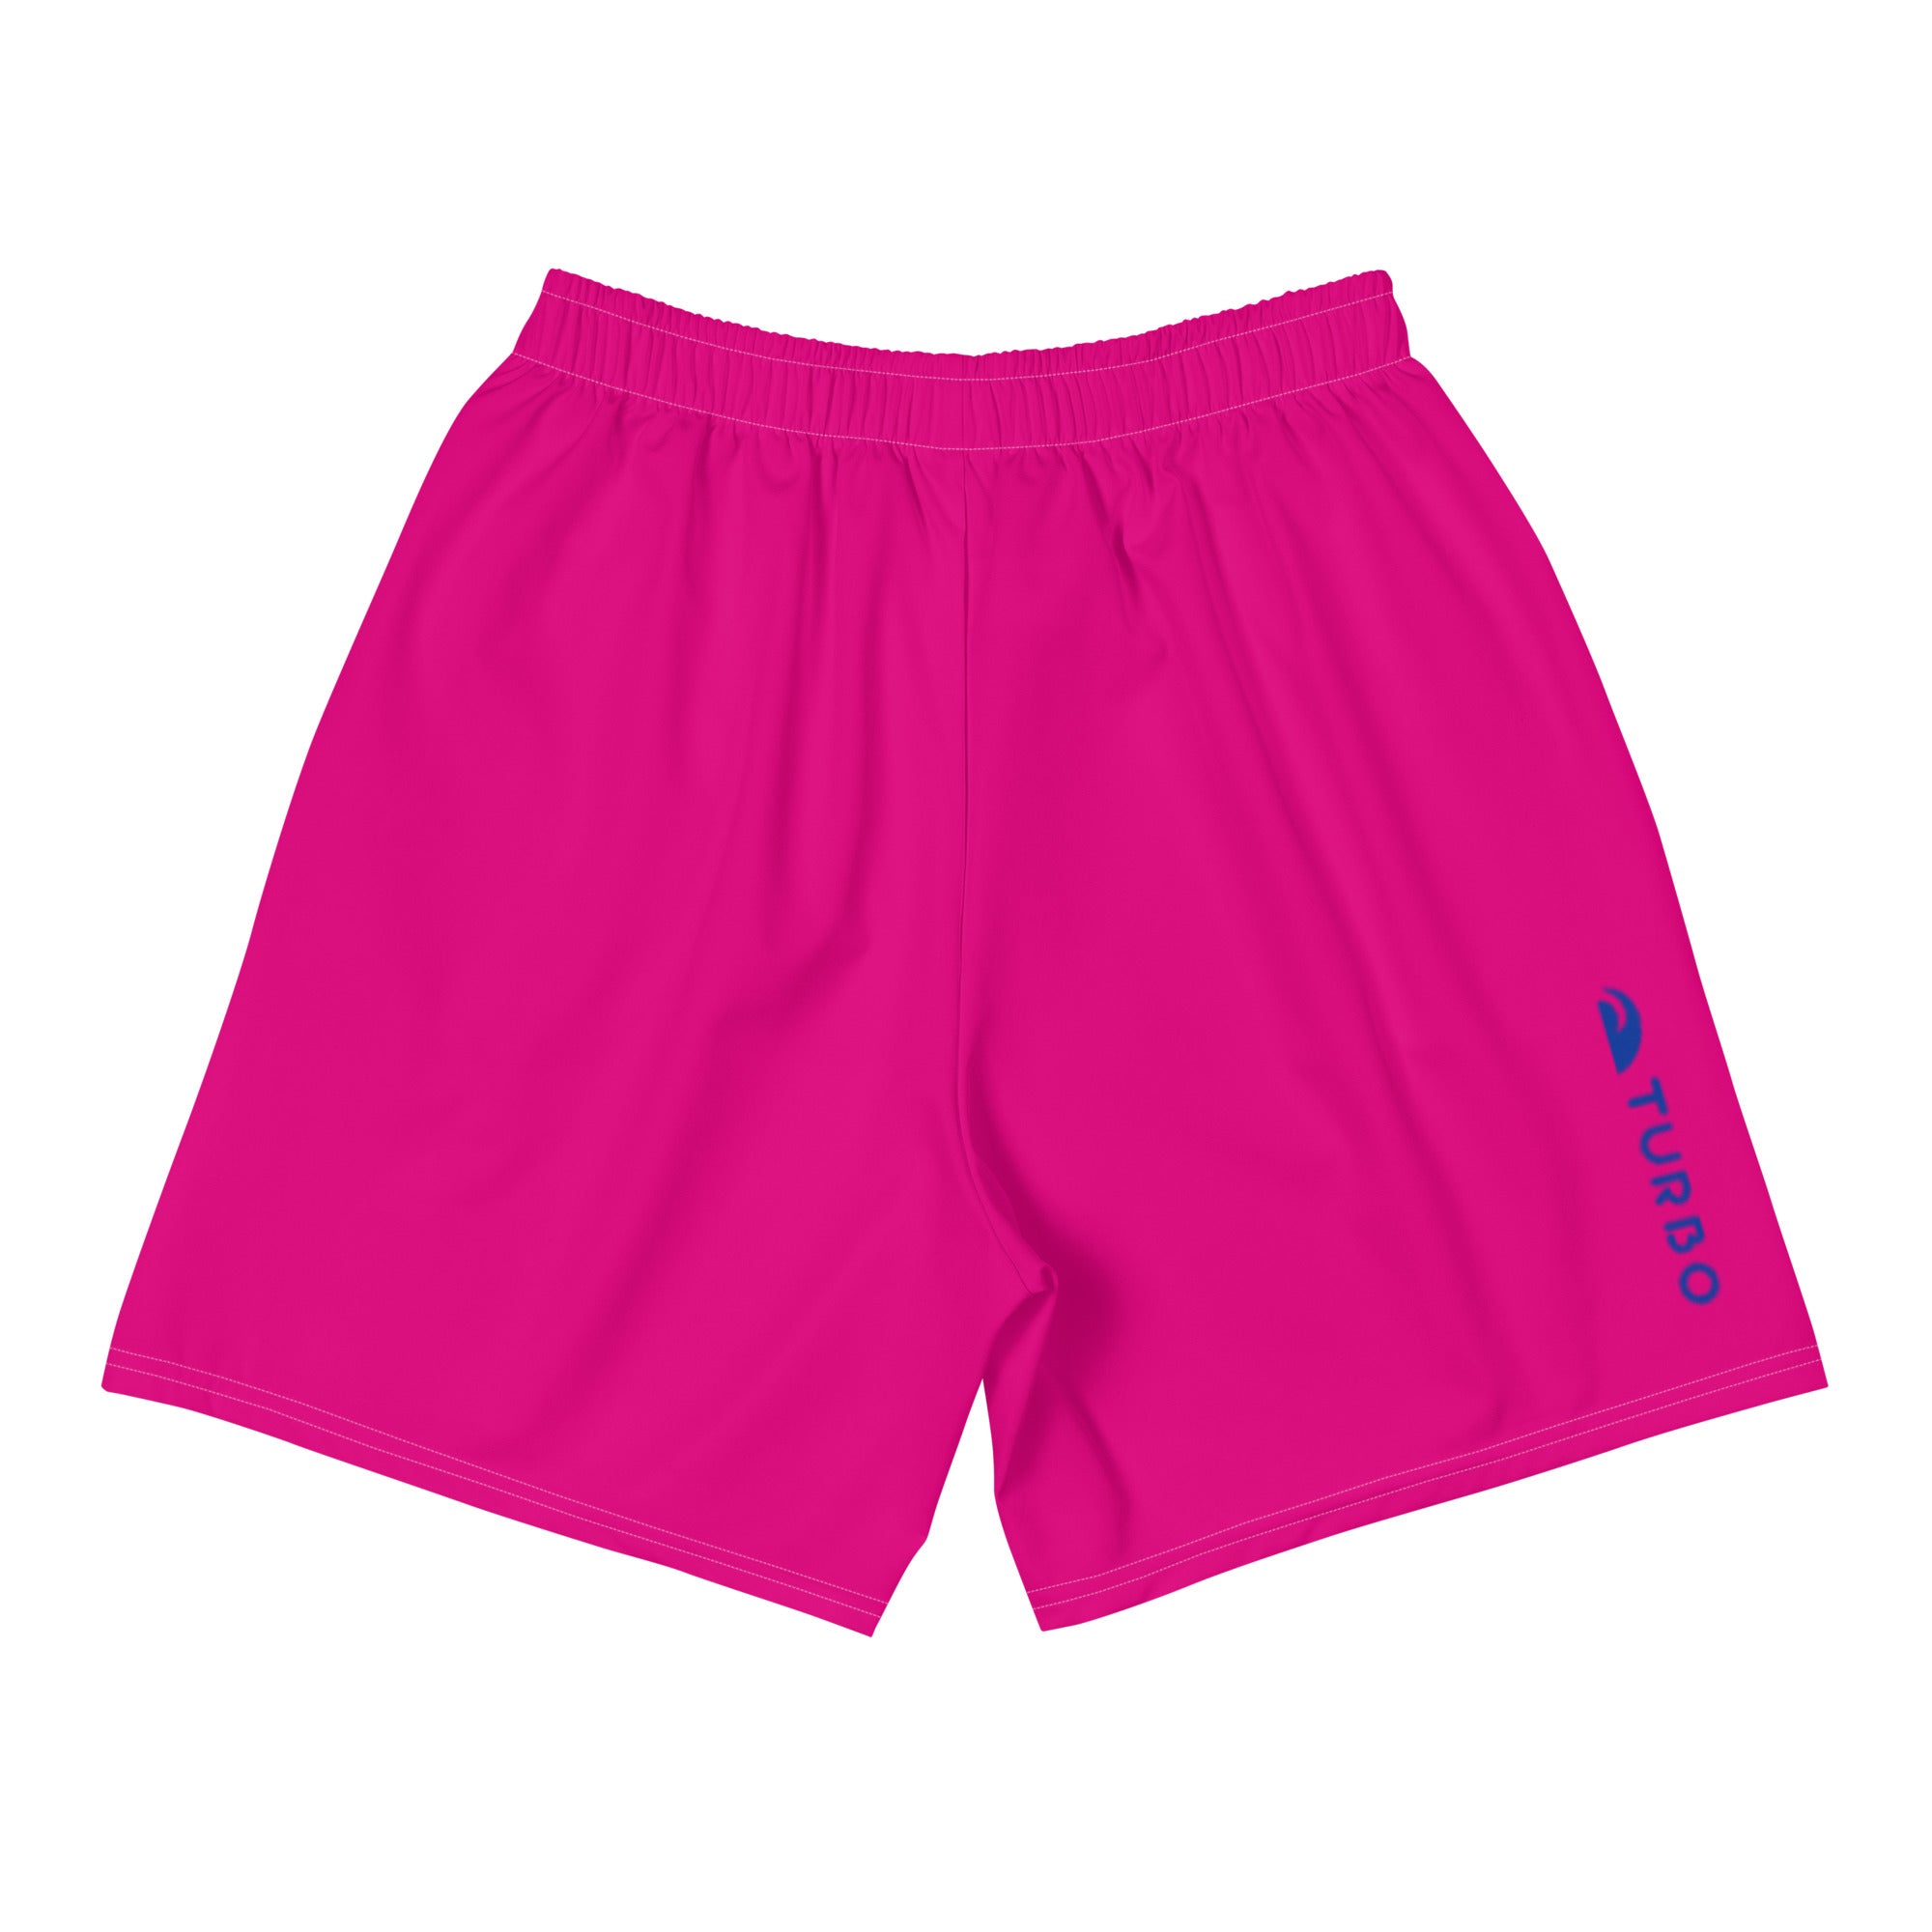 Ultracool-cool feeling two-in-one sports shorts (male)-raspberry deep pink  - Shop VOUX Men's Shorts - Pinkoi